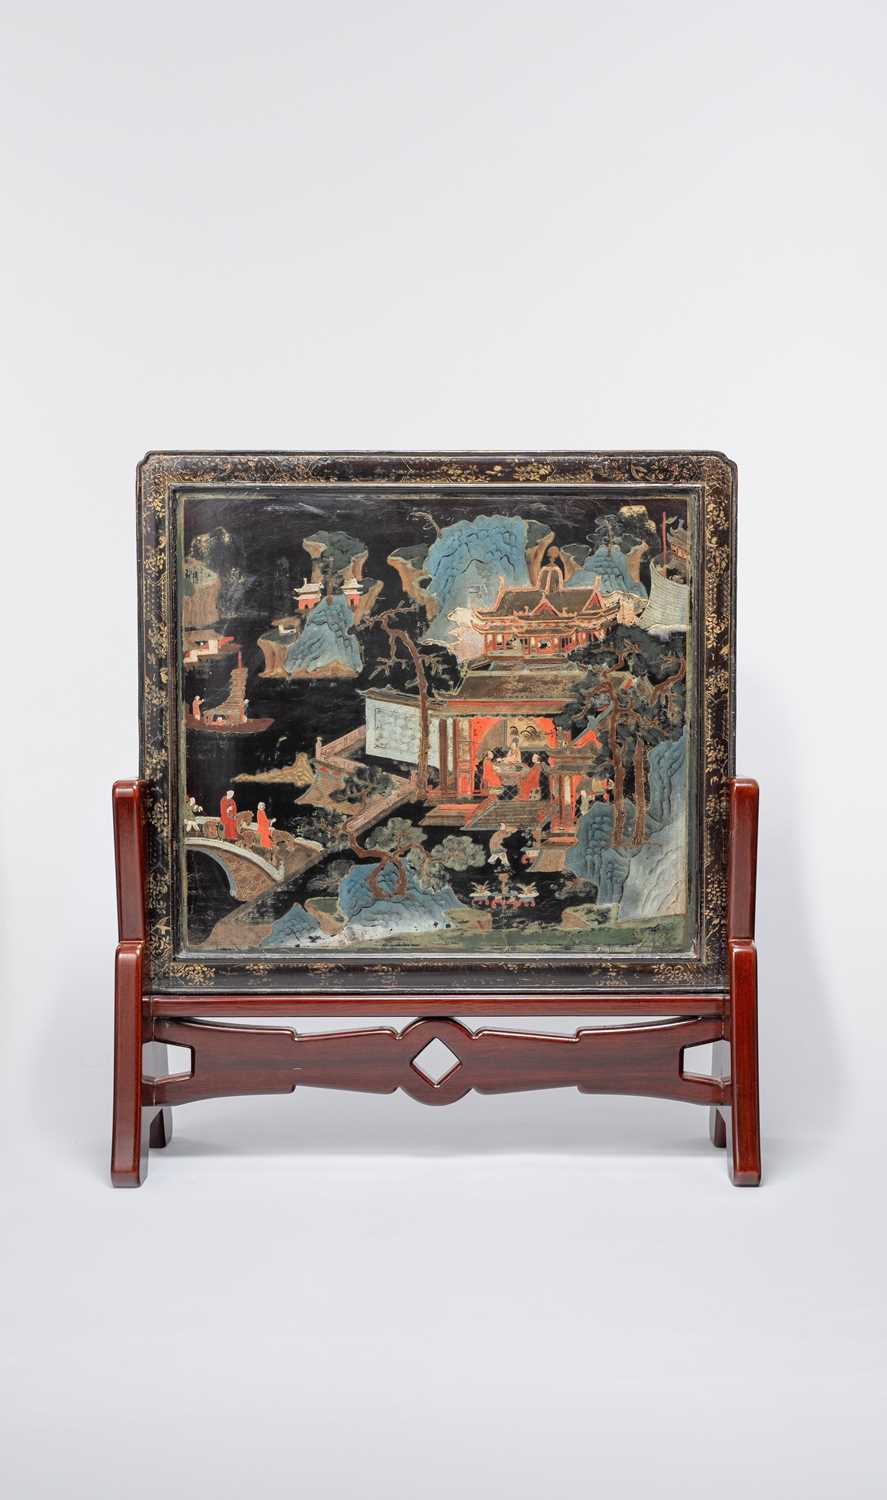 NO RESERVE A CHINESE LACQUER TABLE SCREEN 17TH/EARLY 18TH CENTURY Depicting three scholarly